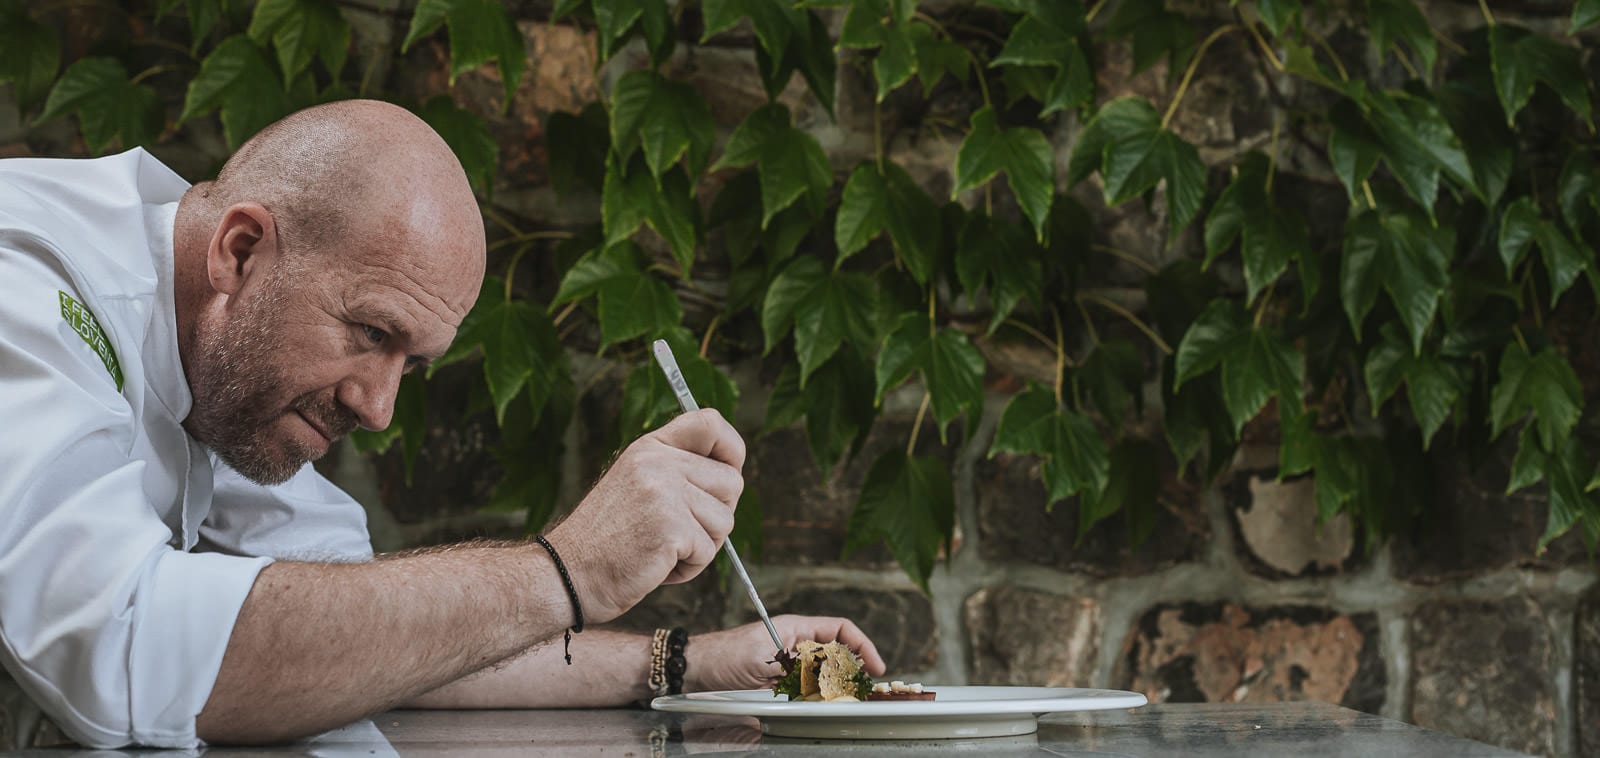 Squareme Mastercard Sous Chef campaign for Michelin star winners in Slovenia - Uroš Štefelin from restaurant Vila Podvin is carefully decorating a plate with plating tweezers in front of an ivy covered brick wall